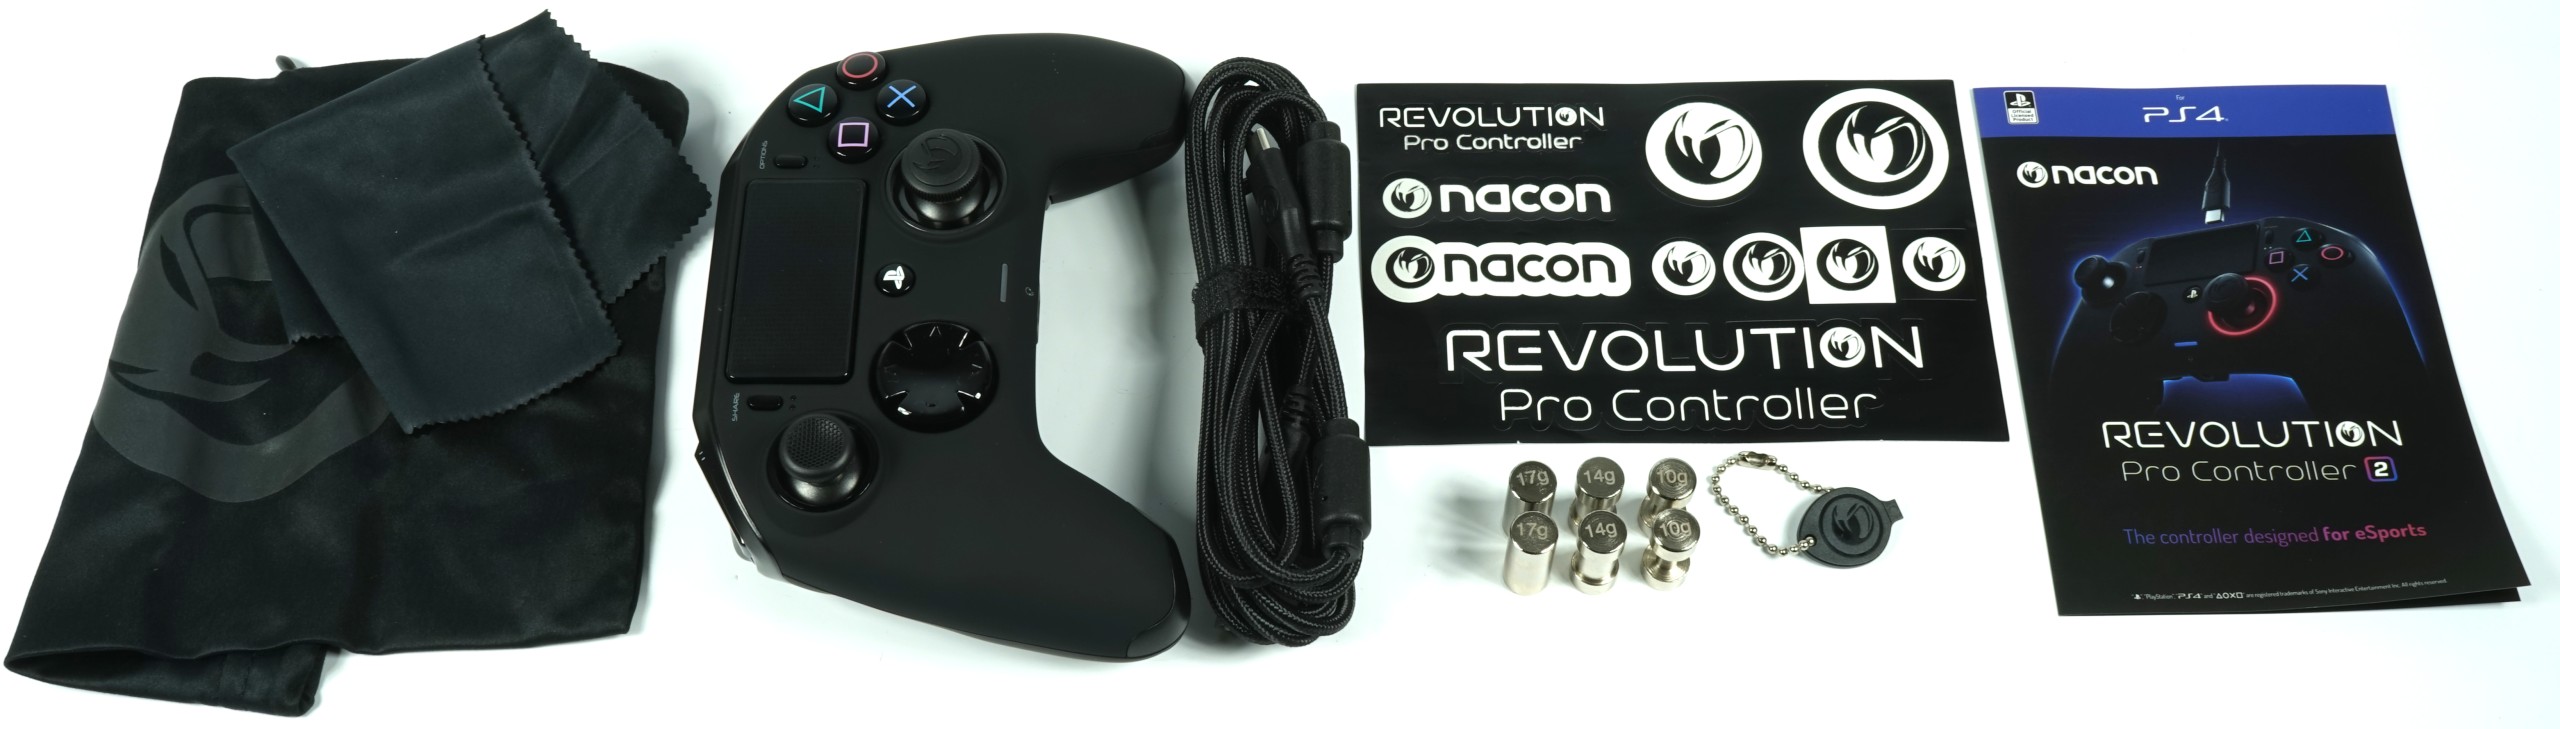 nacon Revolution Pro Controller 2: more than just a simple gamepad